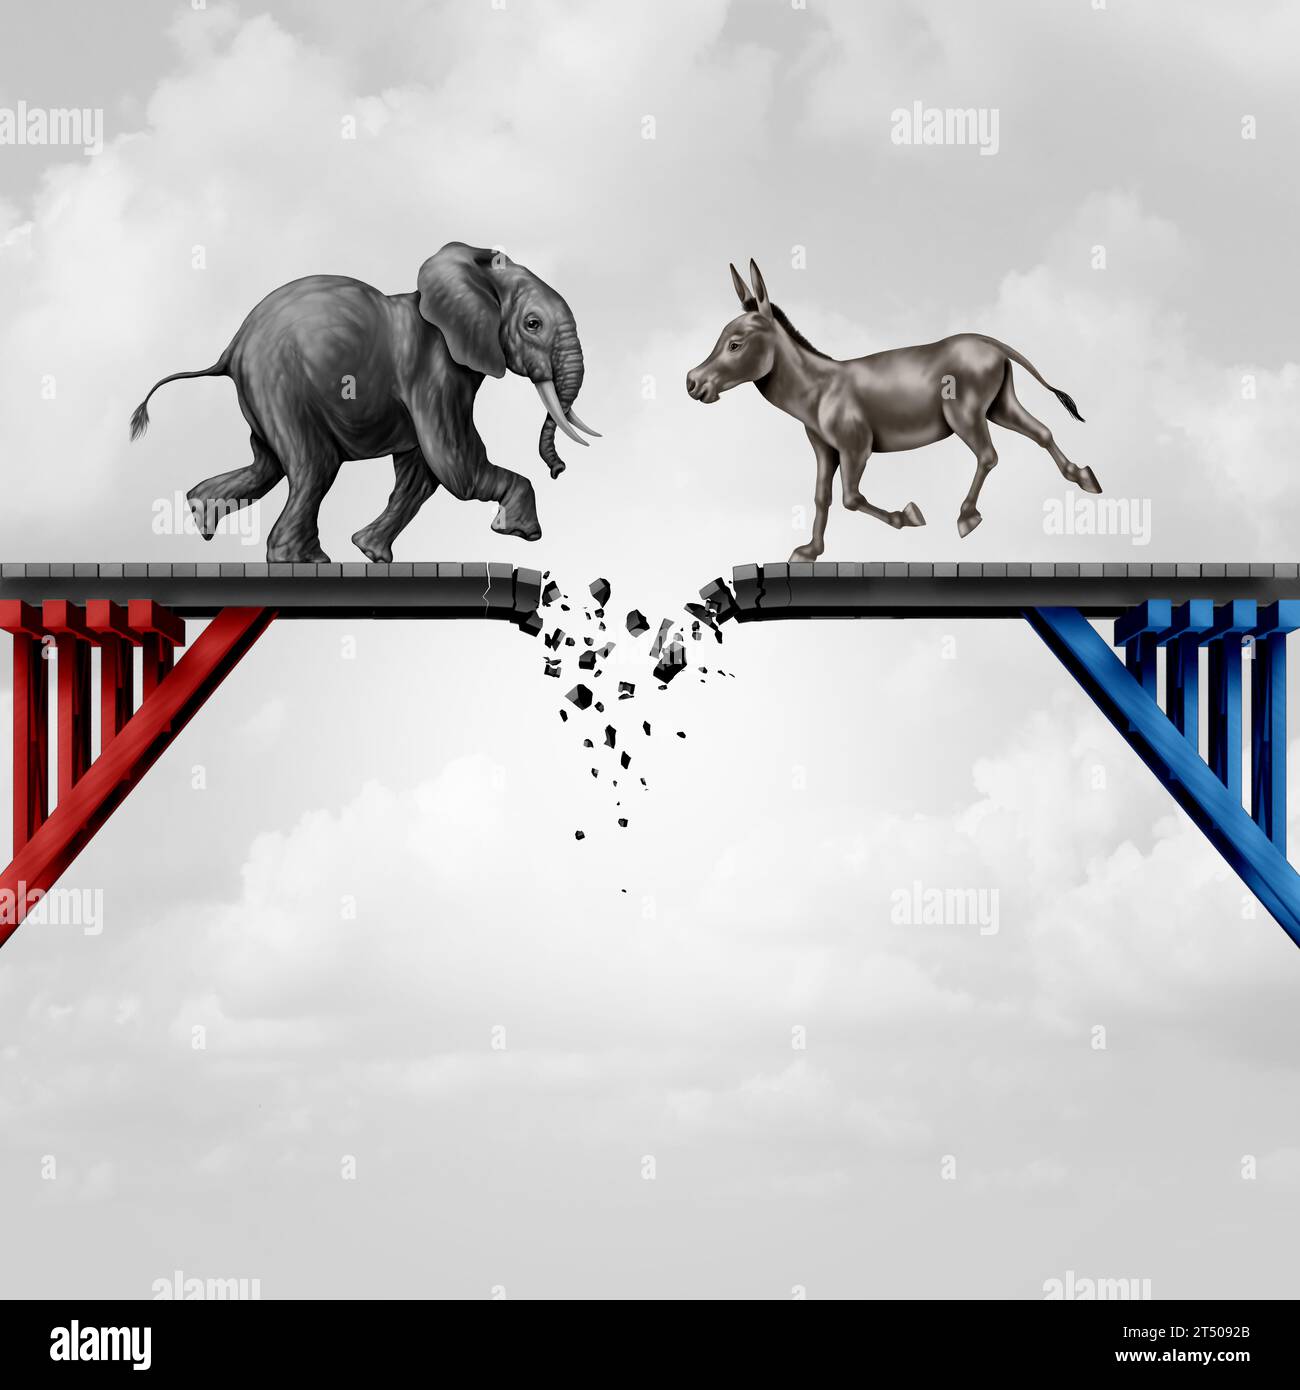 Collapse of Bipartisanship in America as an elephant and a donkey in a breakdown of cooperation and political ideology clash with a broken bridge Stock Photo